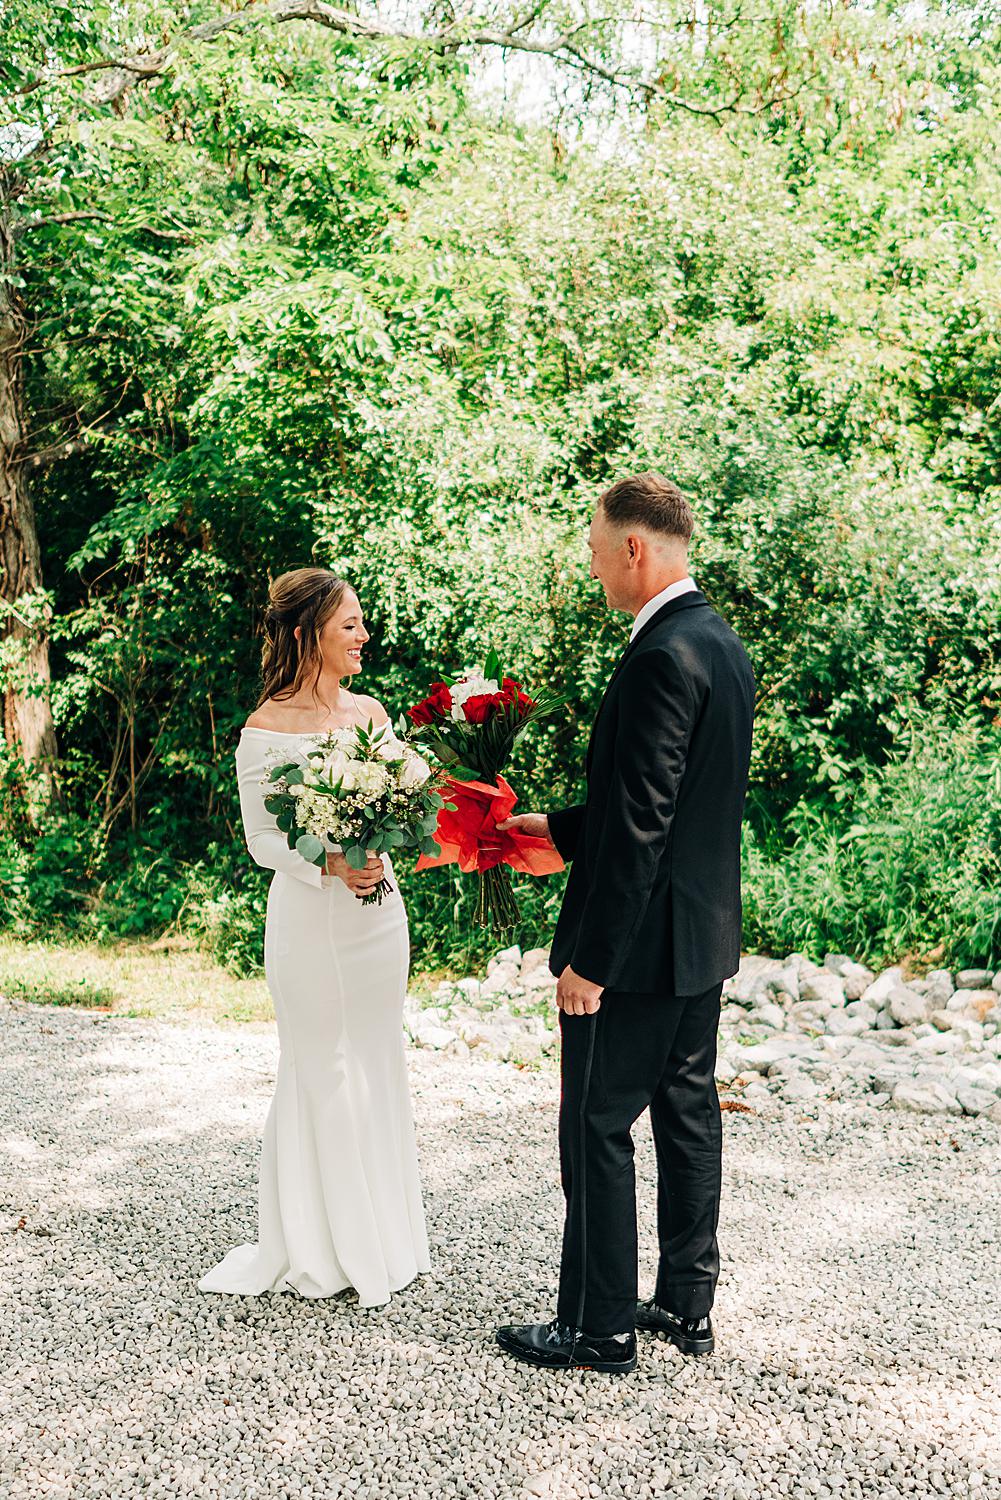 Groom hands his bride to be a bouquet of roses after their first look